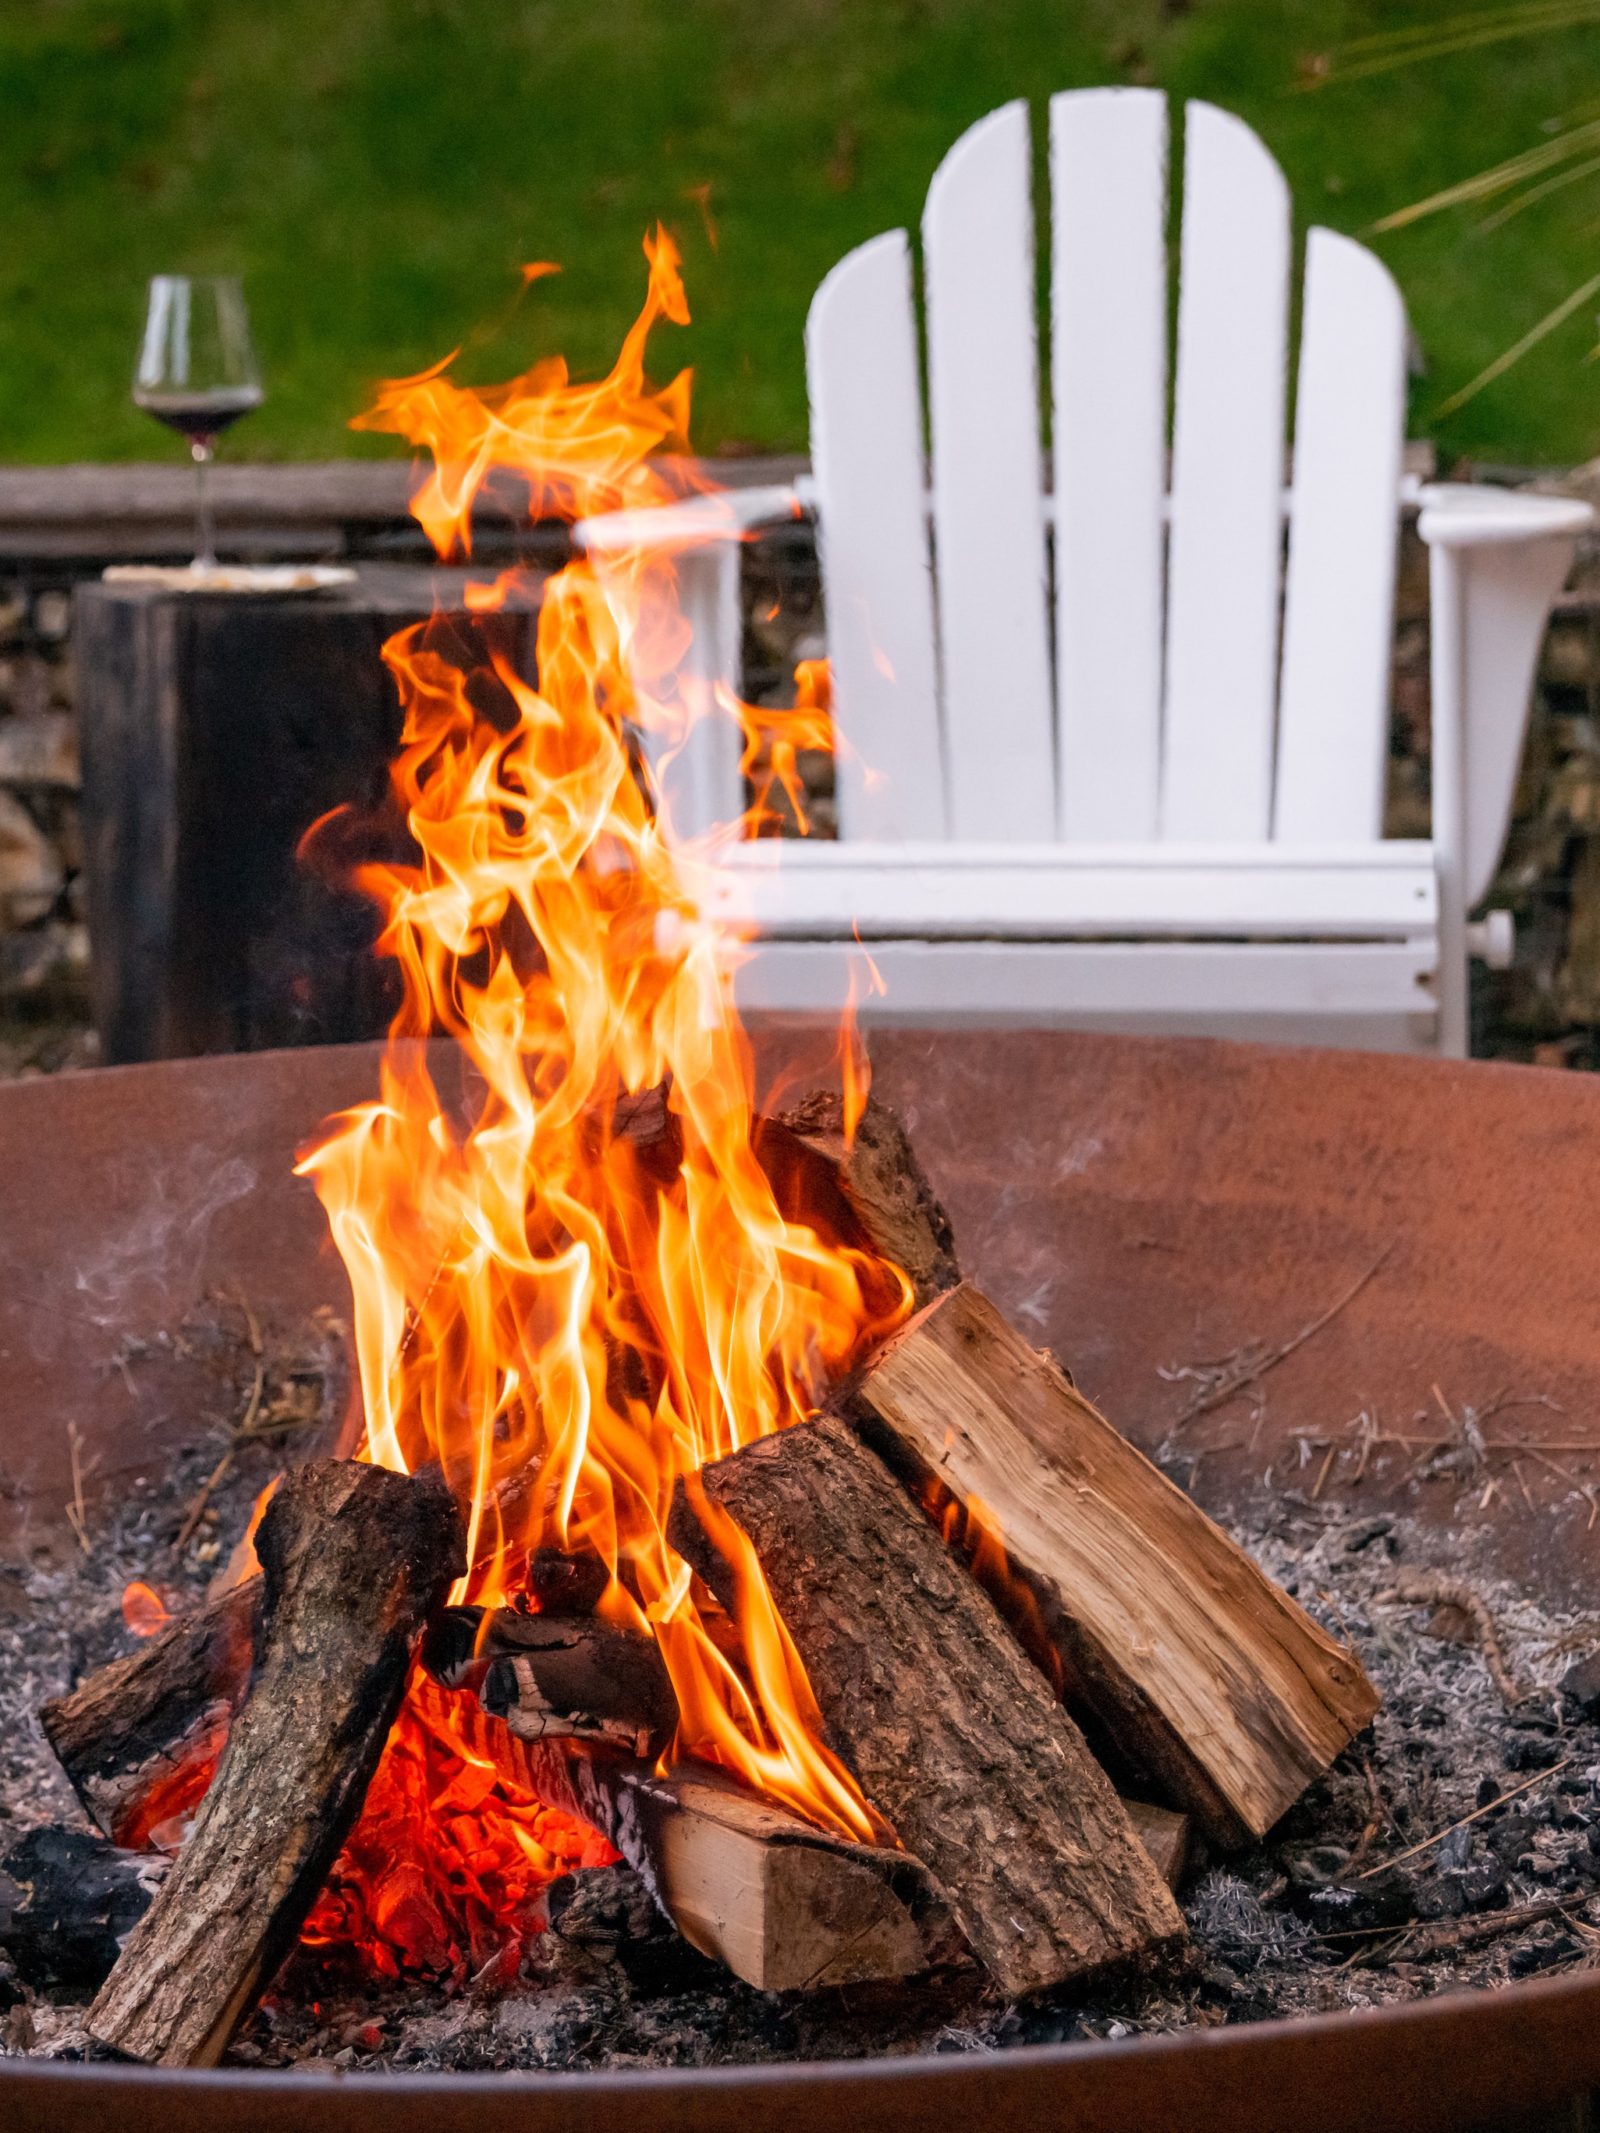 How To Safely Use A Fire Pit On Your, How To Protect Deck From Fire Pit